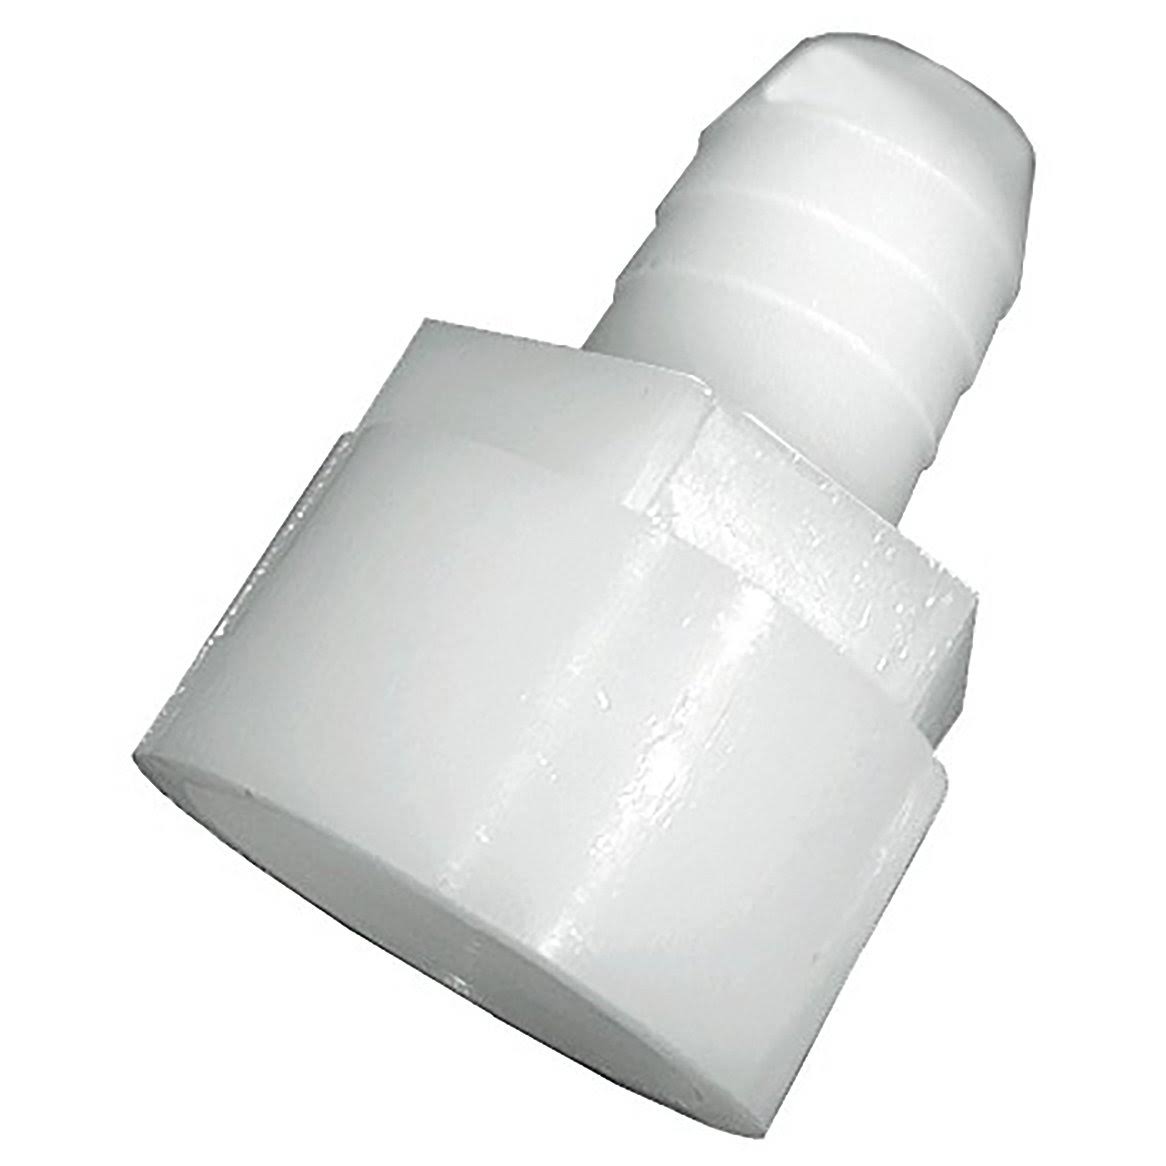 Anderson Nylon Adapter Fitting - 3/4" x 3/4"